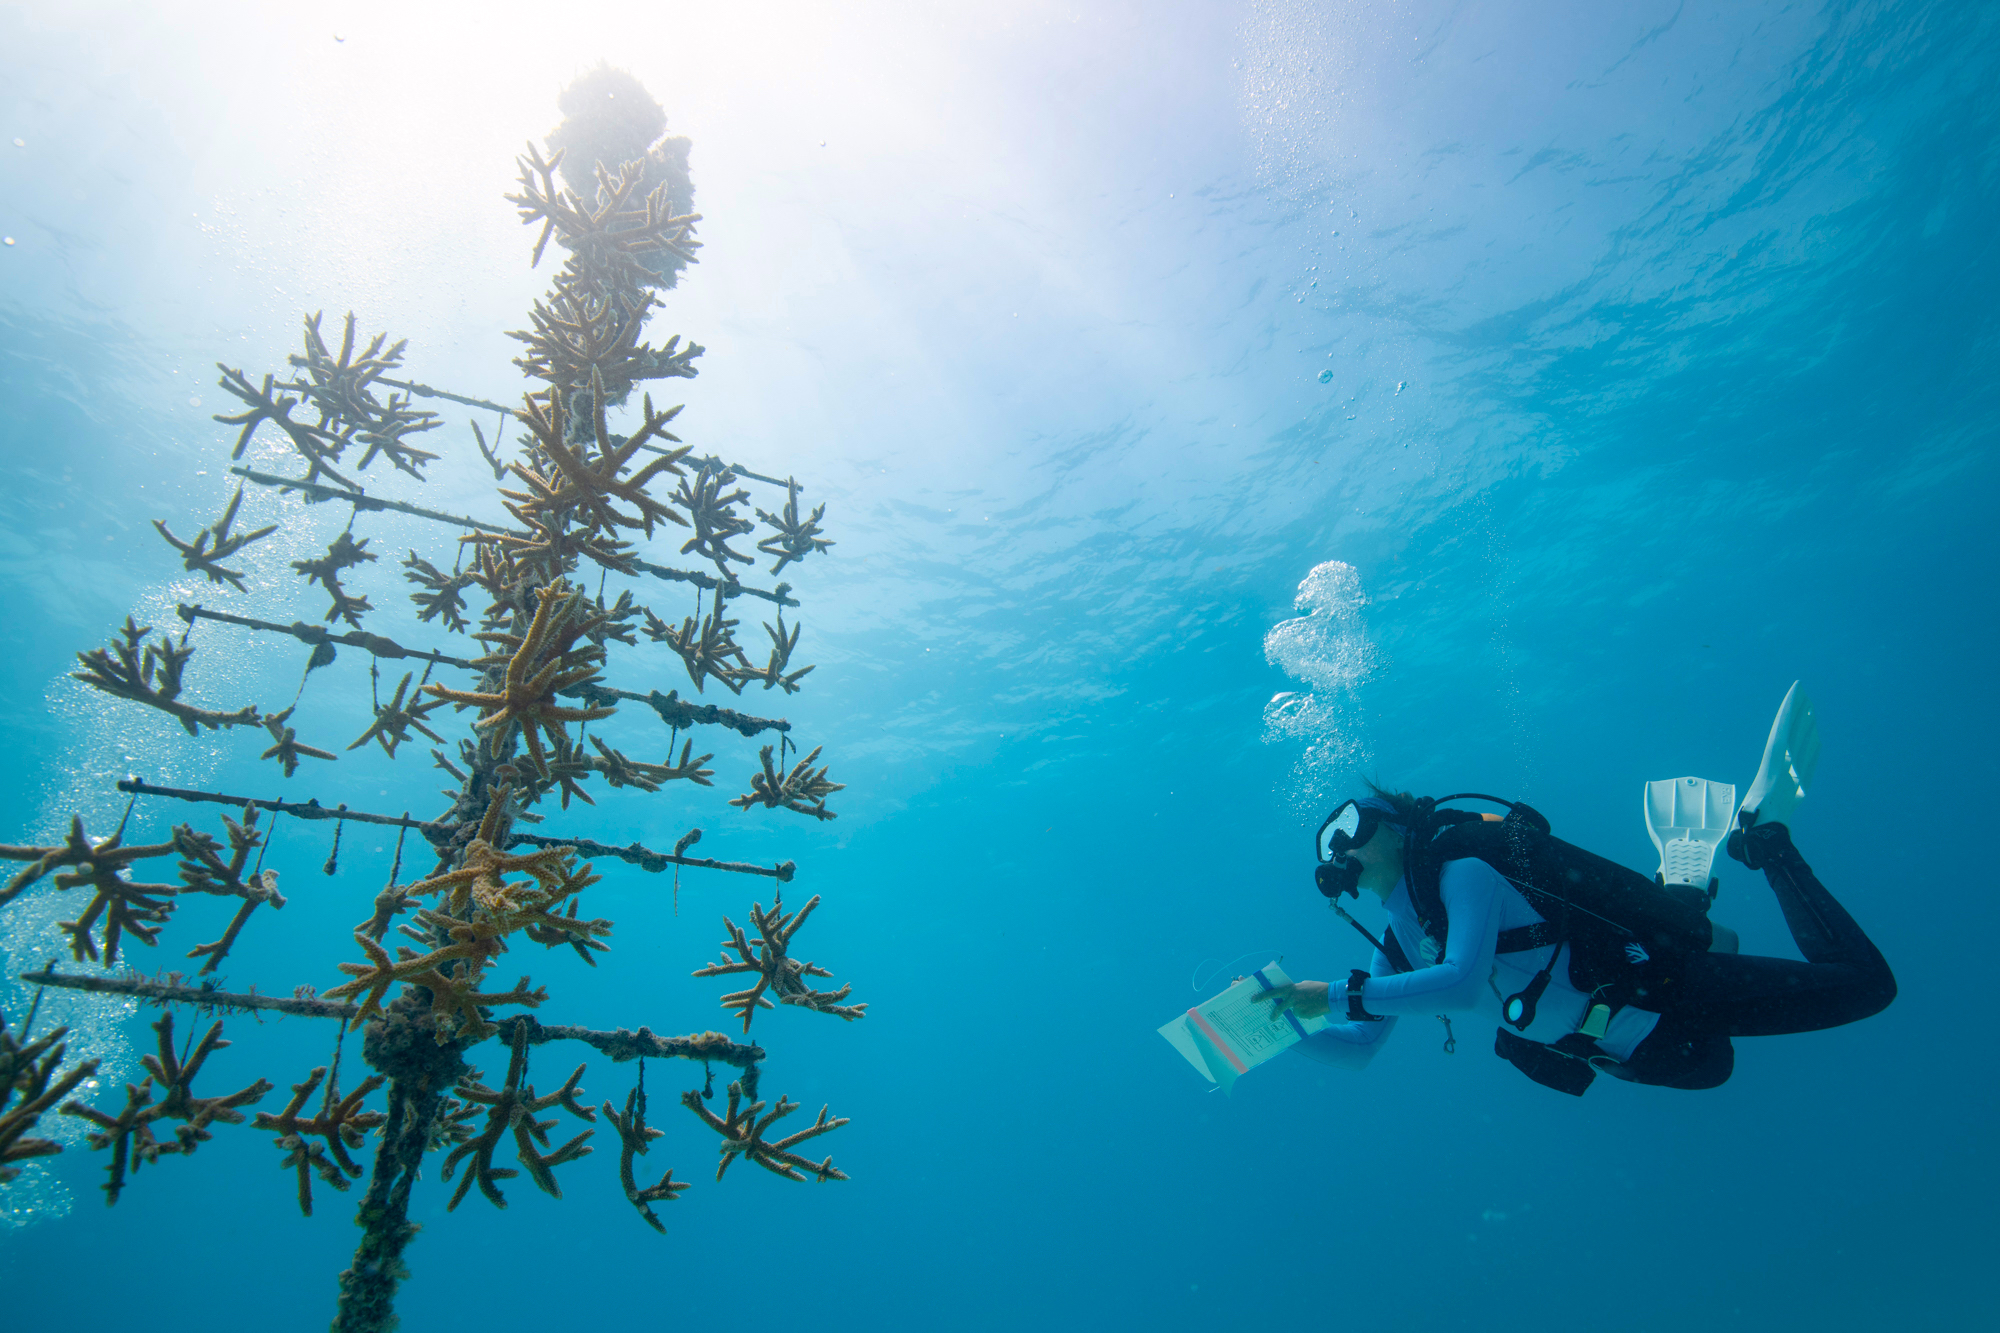 A photo taken underwater showing Amelia Moura scuba diving next to a coral “tree” that looks like a tall pole with branches from which coral clings and dangles. 